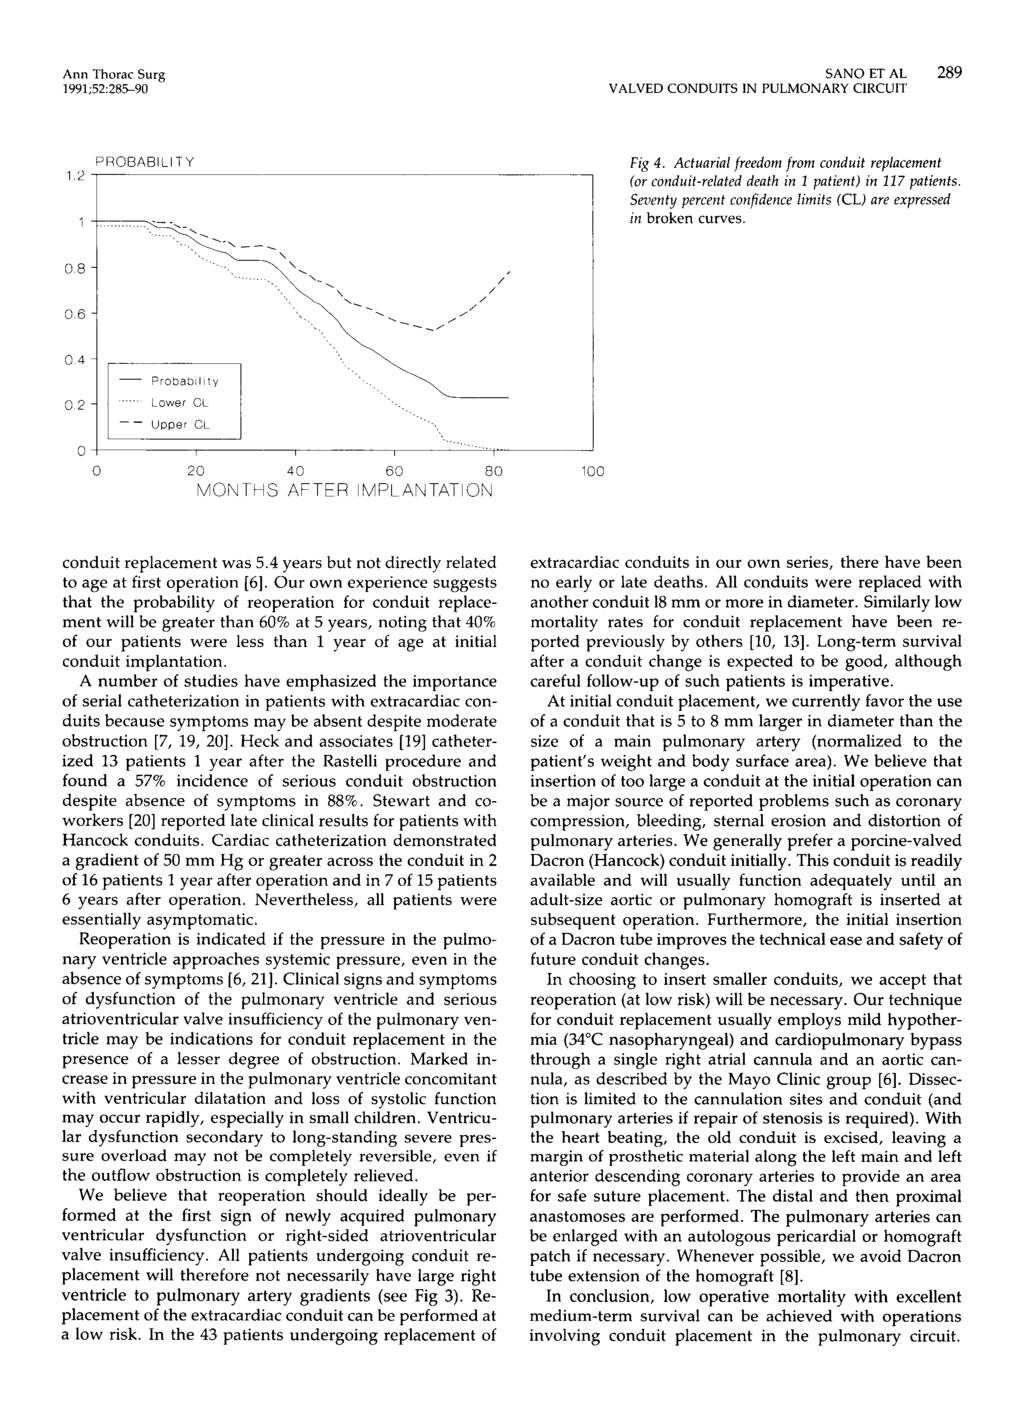 Ann Thorac Surg 1991;52:285-90 SANOETAL 289 PROBABlLl TY 1 2, Fig 4. Actuarial freedom from conduit replacement (or conduit-related death in 2 patient) in 217 patients.